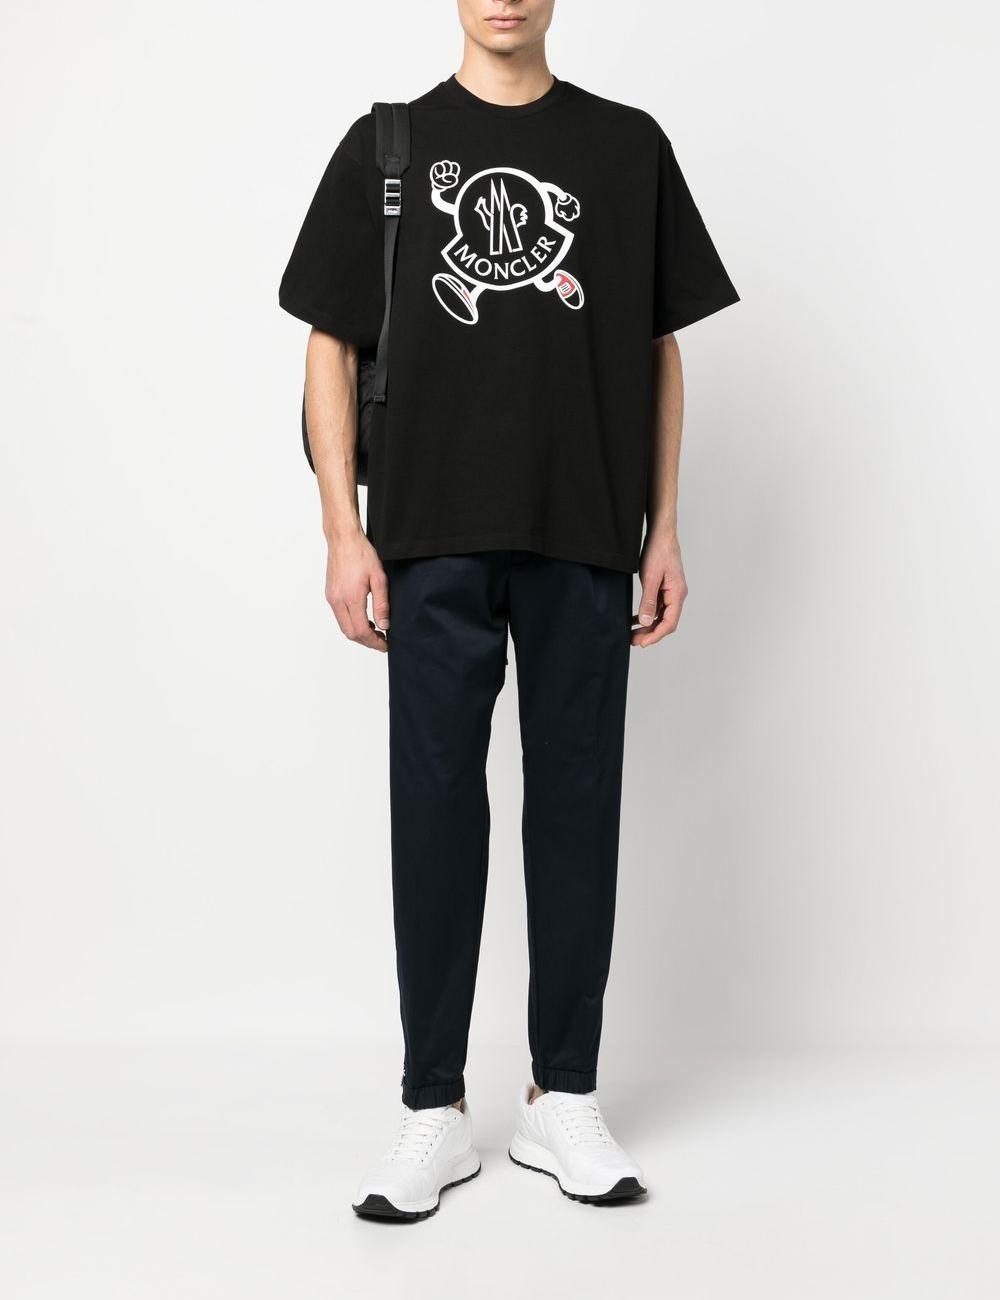 Logo Print Crew Neck T-Shirt From Moncler Featuring Black